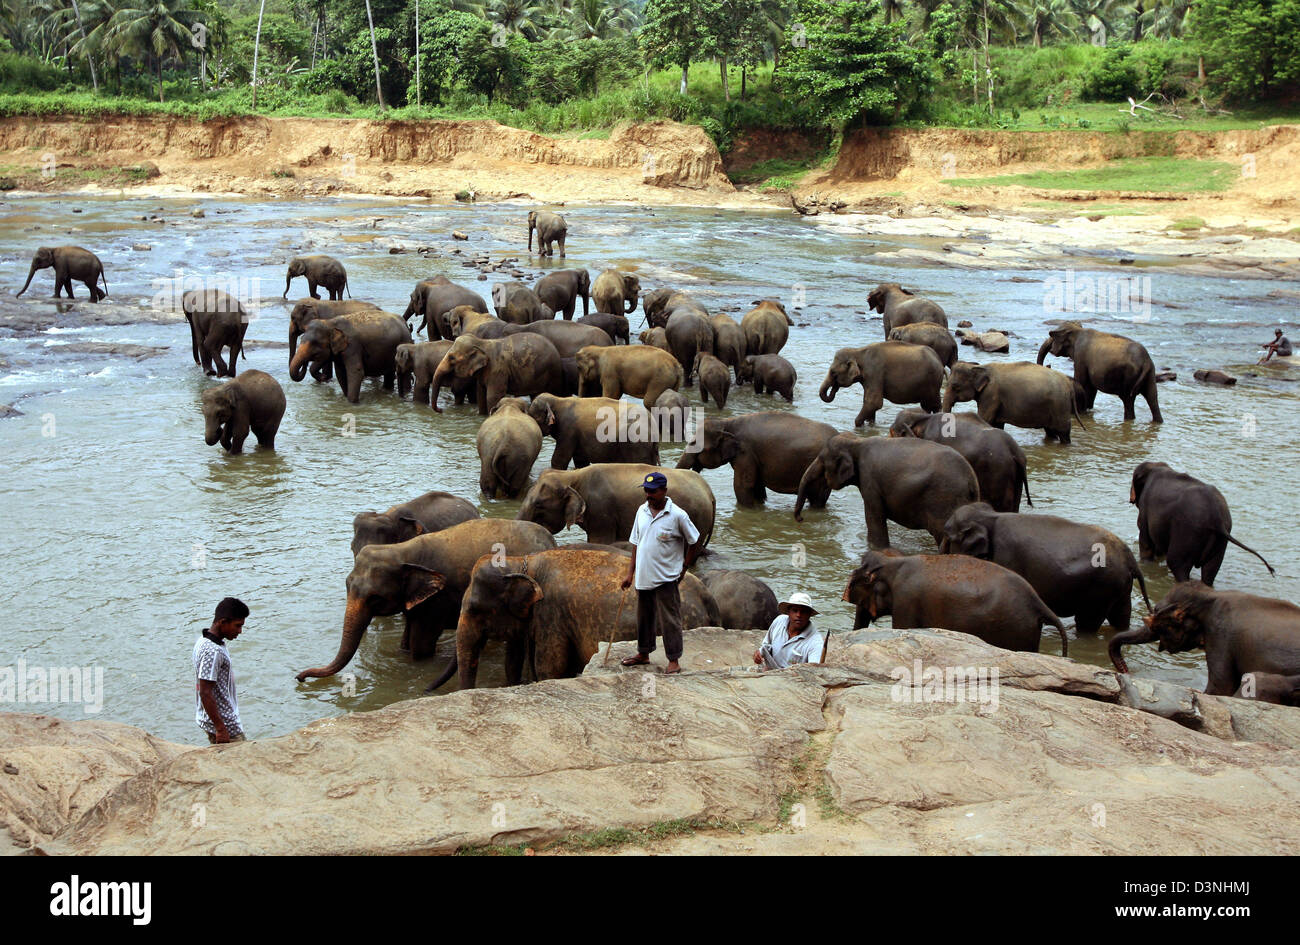 Mahouts (elephant guides) oversee elephants taking a refeshing bath in a river after their hard work in the elephant orphanage in Pinnawela, Sri Lanka, 26 April 2006. Elephants are highly recognized on Sri Lanka for their work capacity. To walk through under the stomach of an elephant shal bring lifetime-long luck. Photo: Maurizio Gambarini Stock Photo